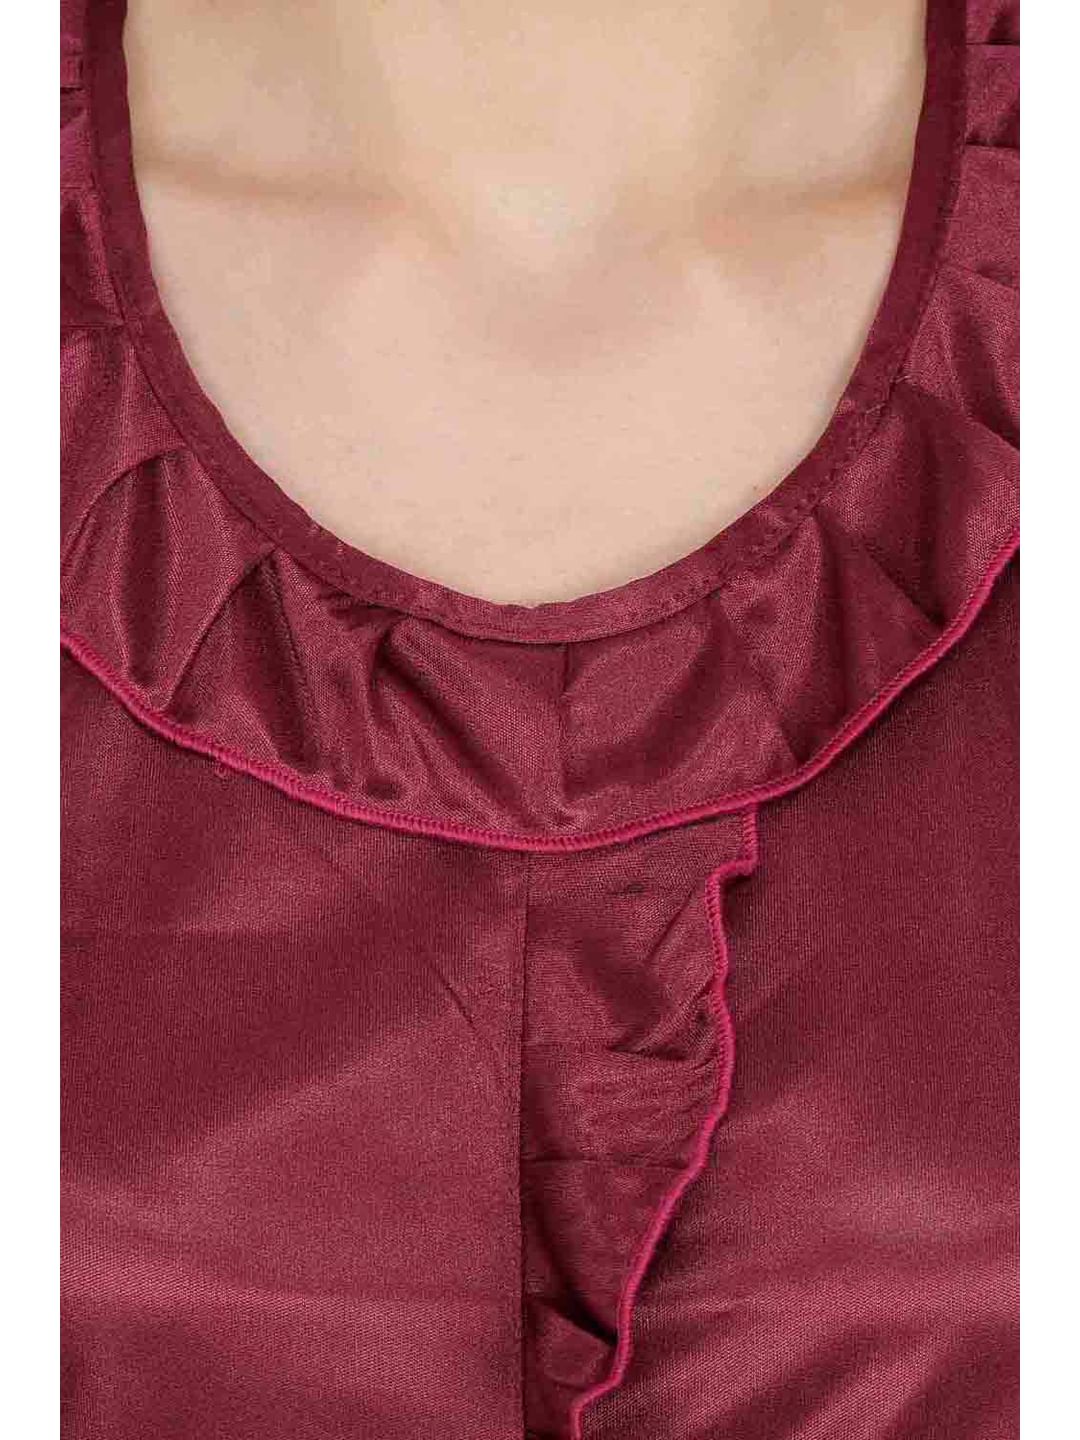 Satin Wine Red Nightsuit Set with Slippers (Dark Purple, Free Size)